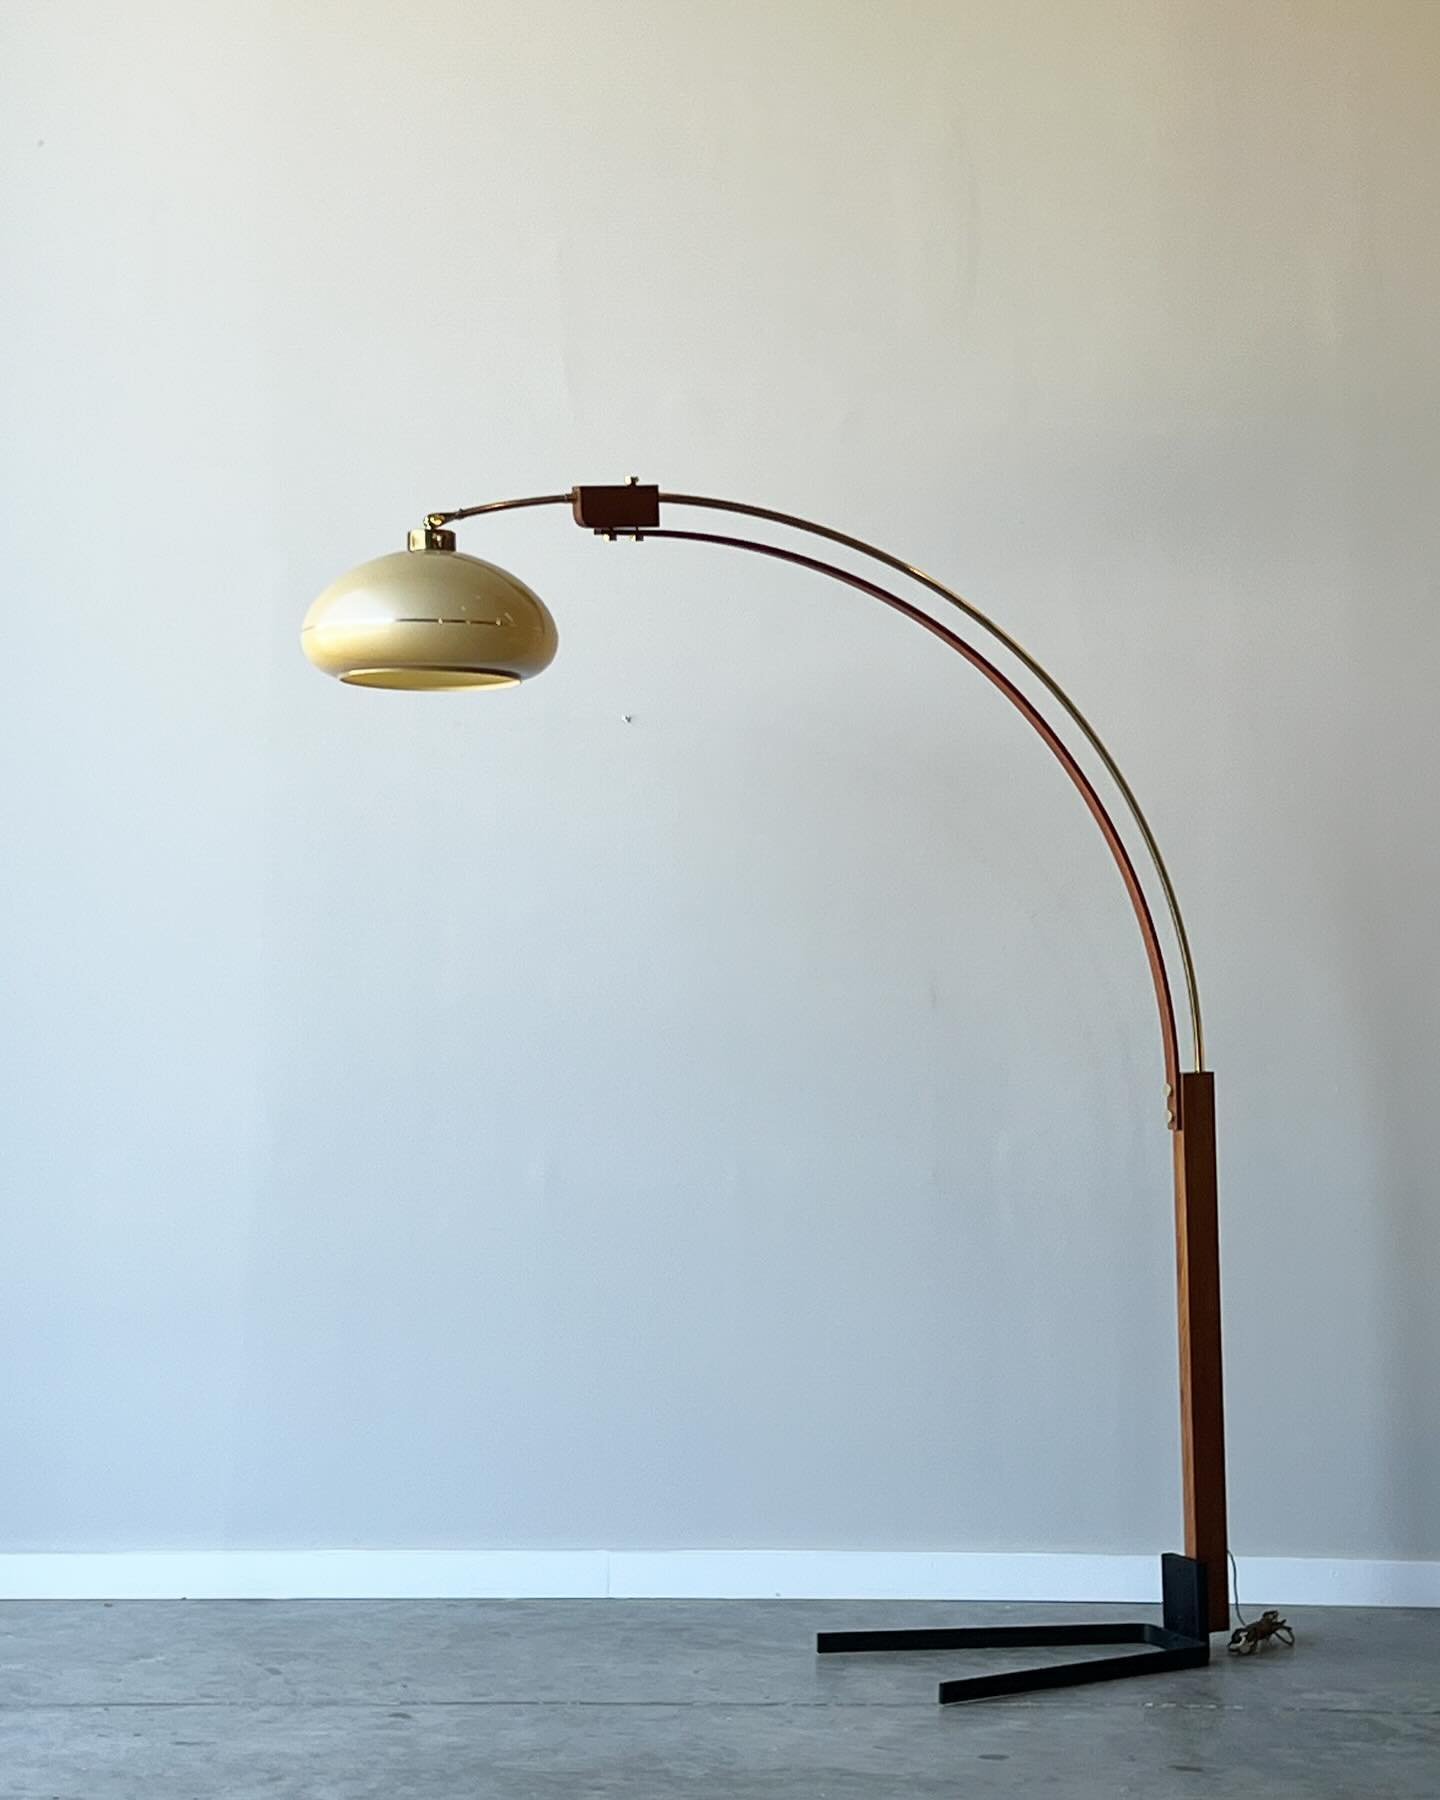 SOLD ~ Mid-century arc floor lamp designed by Nova of California. This arc is extremely unique regarding the materials used. Bentwood oak gives a warmth in addition to the brass accents. The lamp sits on a slender black metal u-shaped base. The shade